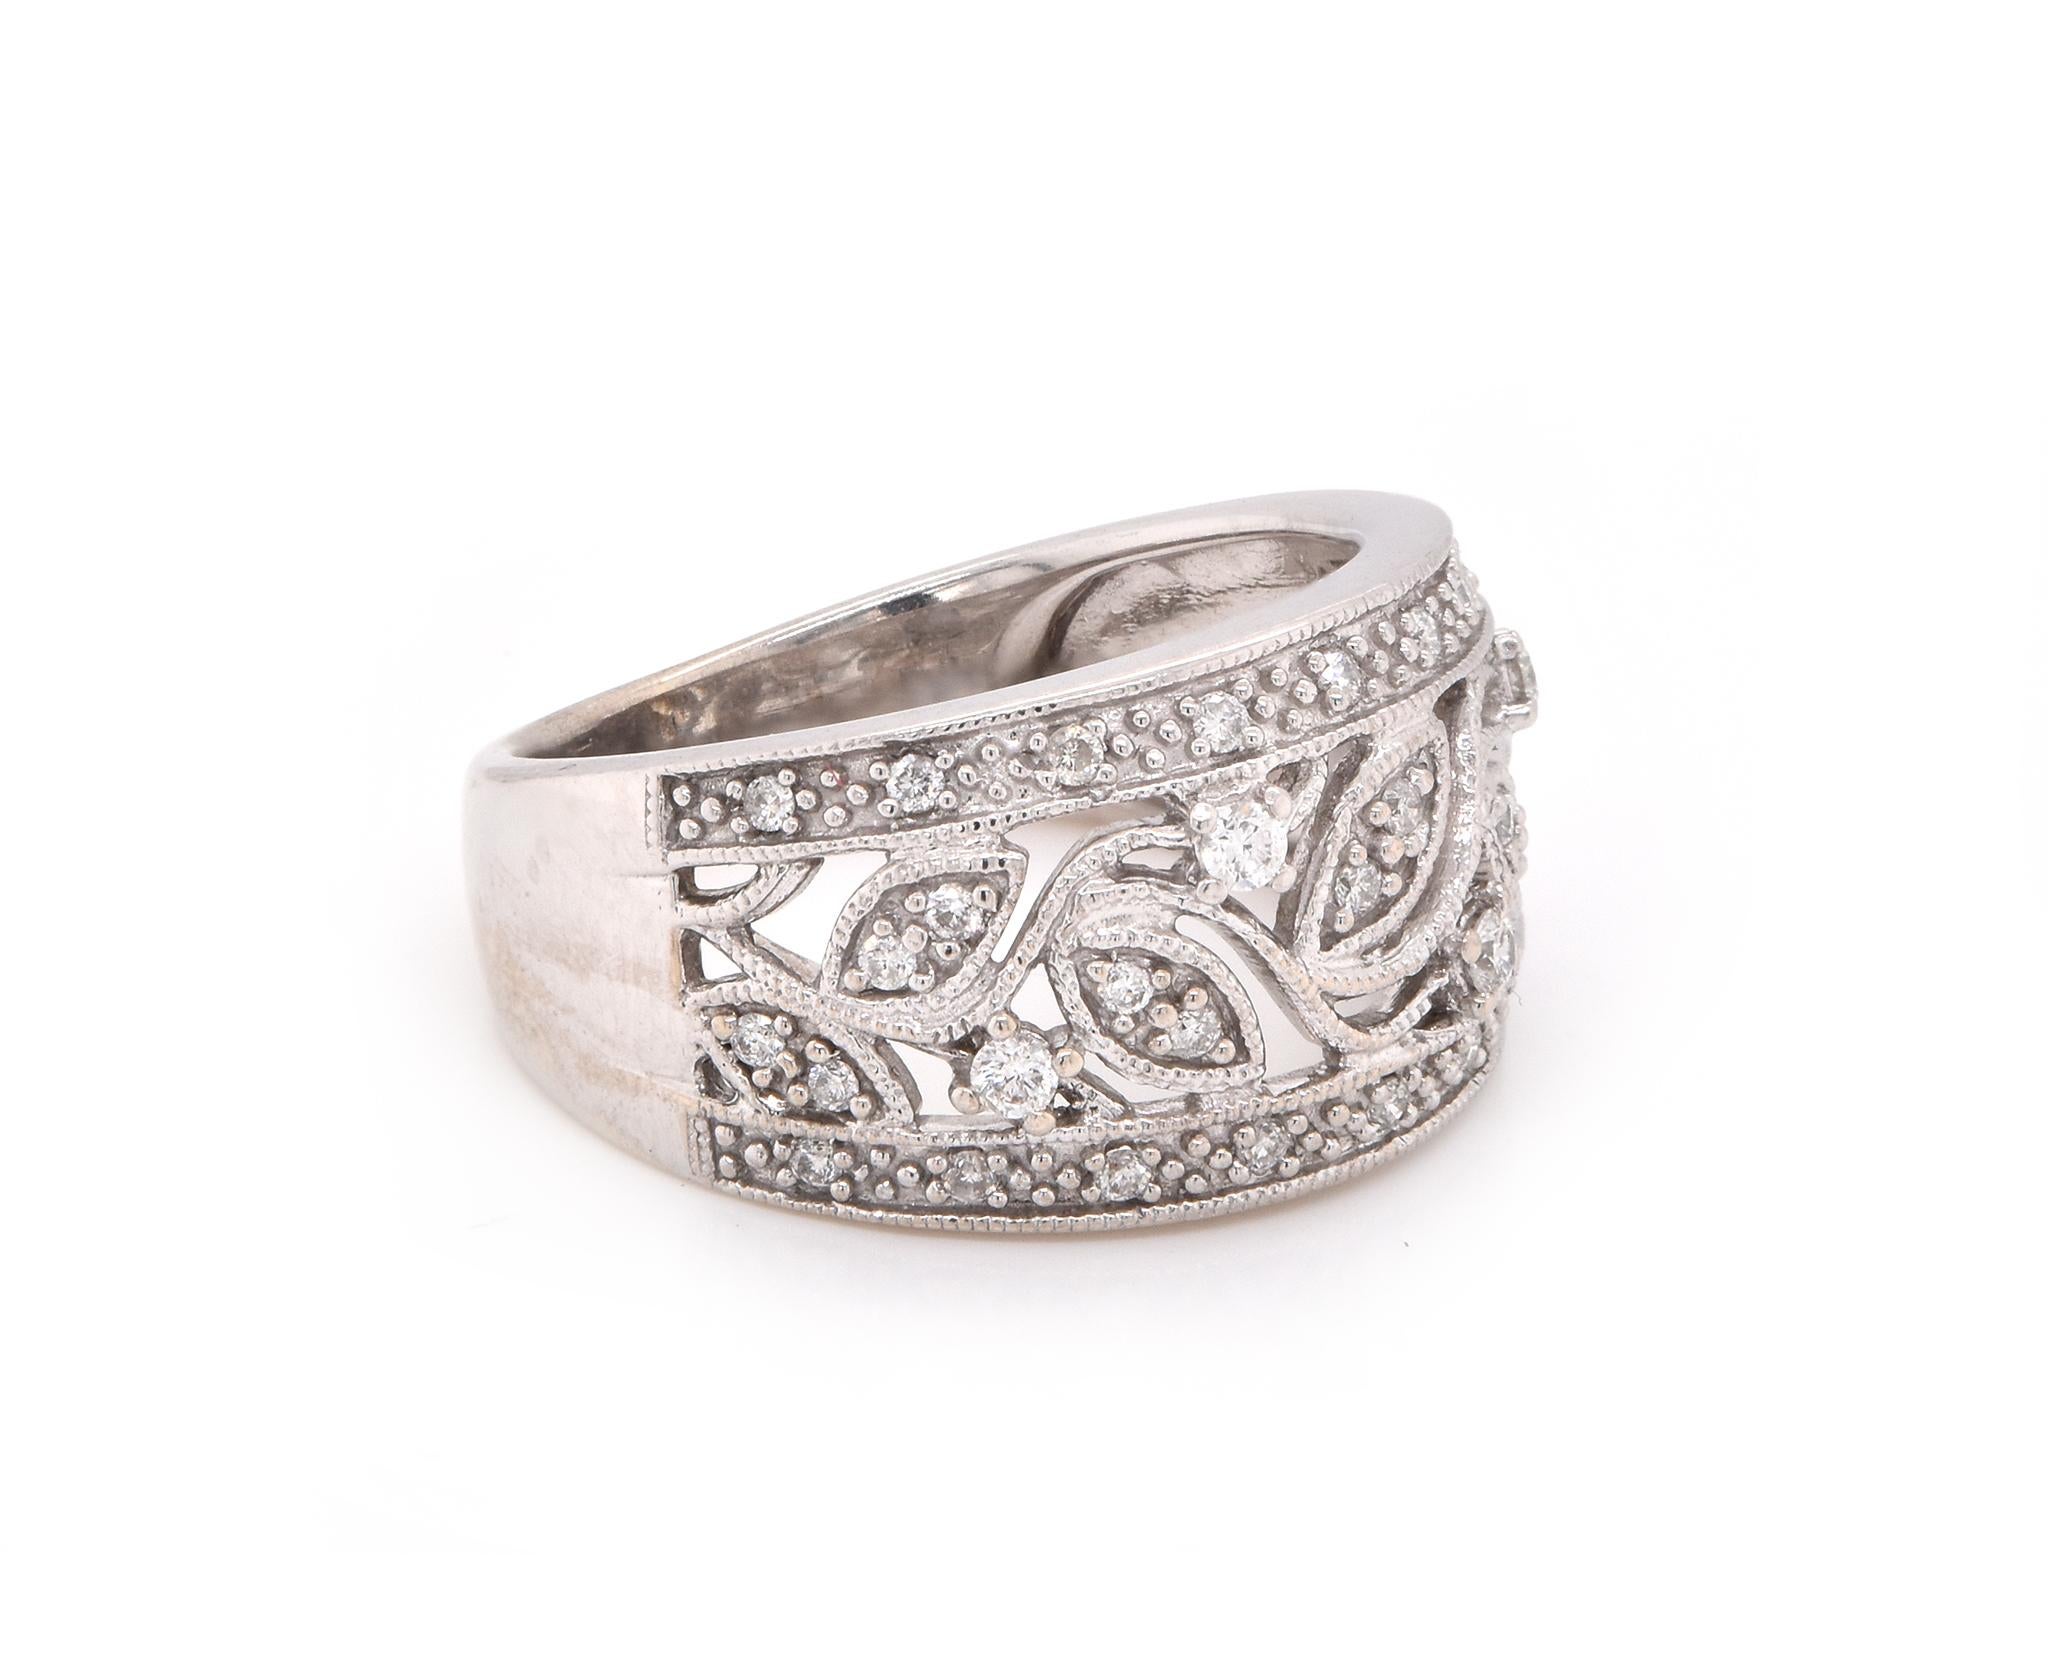 Designer: custom
Material: 14K white gold
Diamonds: 34 round cut = .24cttw
Color: H
Clarity: SI1
Ring size: 6 (please allow two additional shipping days for sizing requests)
Dimensions: ring top is 11.16mm wide 
Weight:  5.3 grams 
